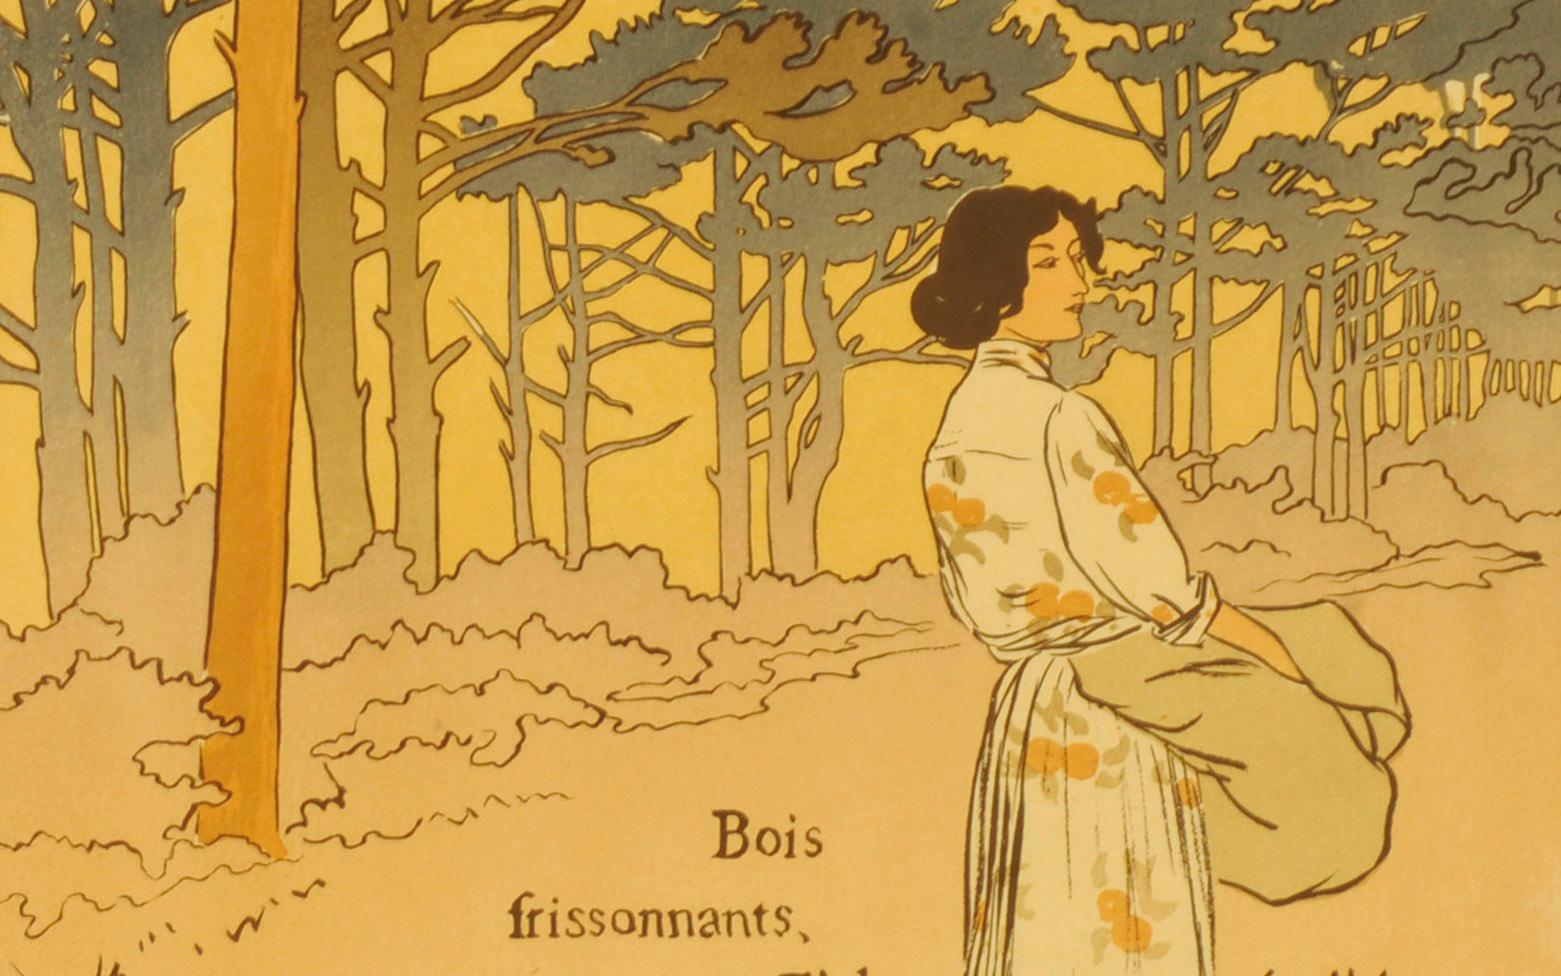 Bois Frissonnants, Ciel Etoile
Color lithograph, 1893
Signed in pencil lower right
Edition: 100 (90/100)
Published by Andre Marty in L'Estampe Originale, Paris, with their embossed stamp lower left corner.
Collector's marks verso: ESC and Sealyham